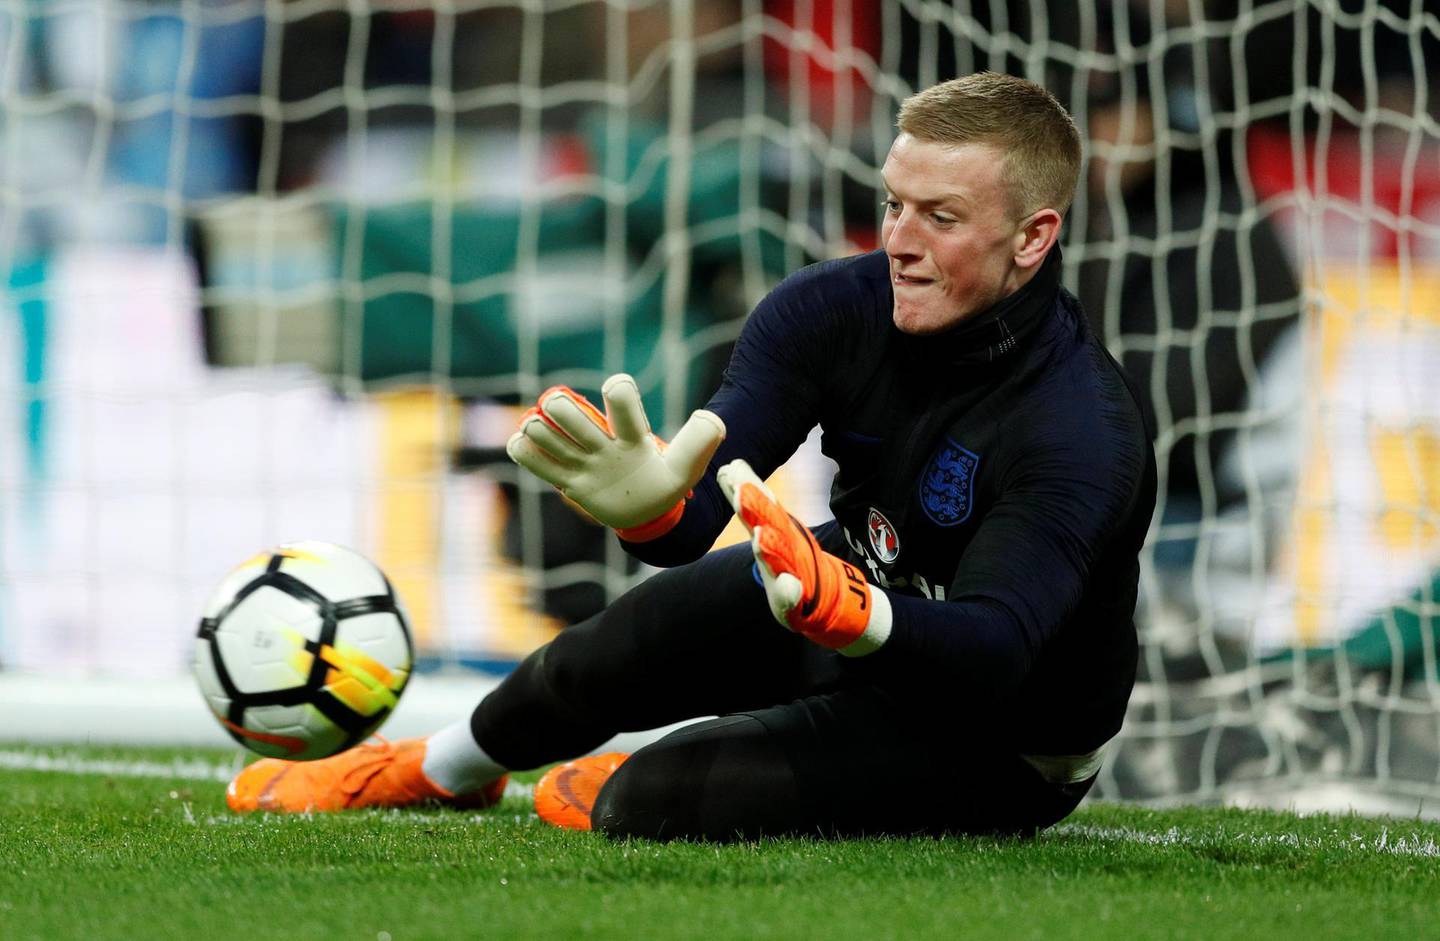 Soccer Football - International Friendly - England vs Italy - Wembley Stadium, London, Britain - March 27, 2018   England’s Jordan Pickford warms up before the match    Action Images via Reuters/John Sibley